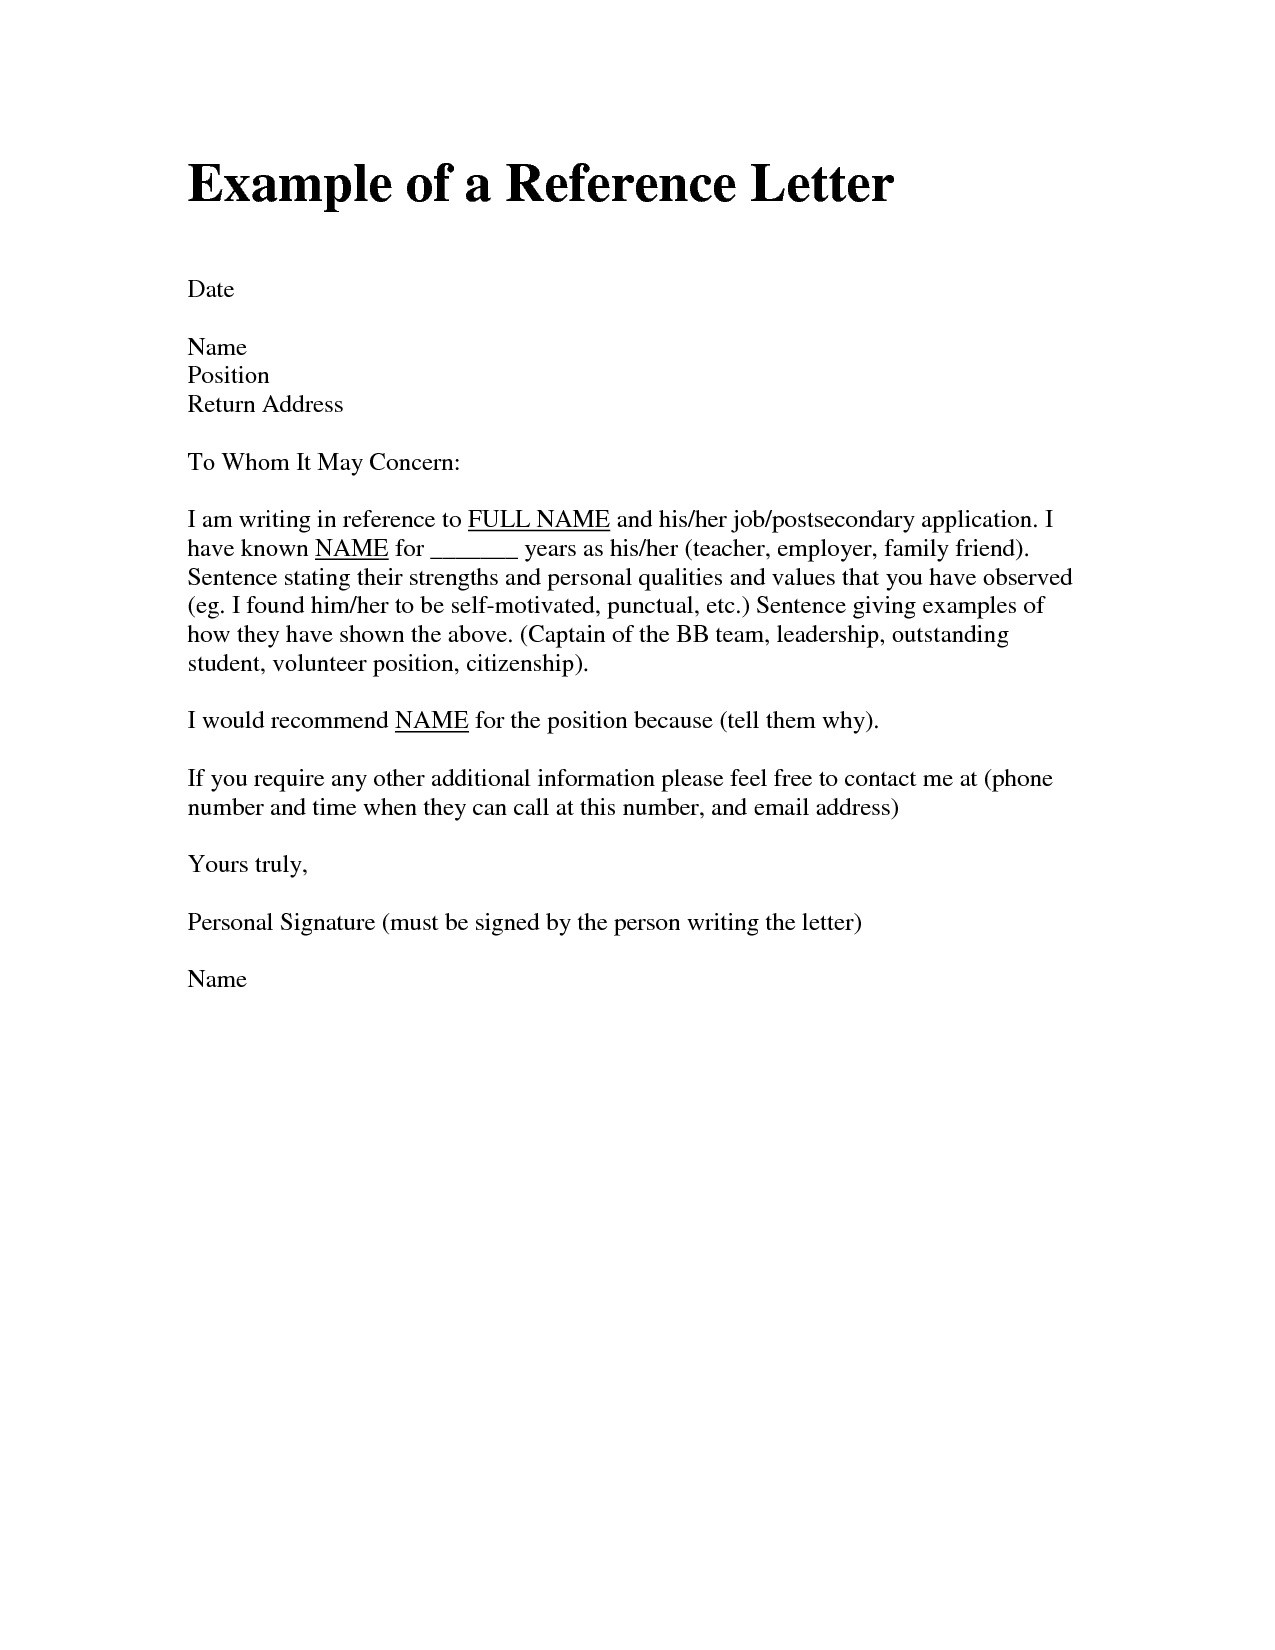 Sample Character Reference Letter for A Friend Template - Example Personal Re Mendation Letter for Job Best Re Mendation